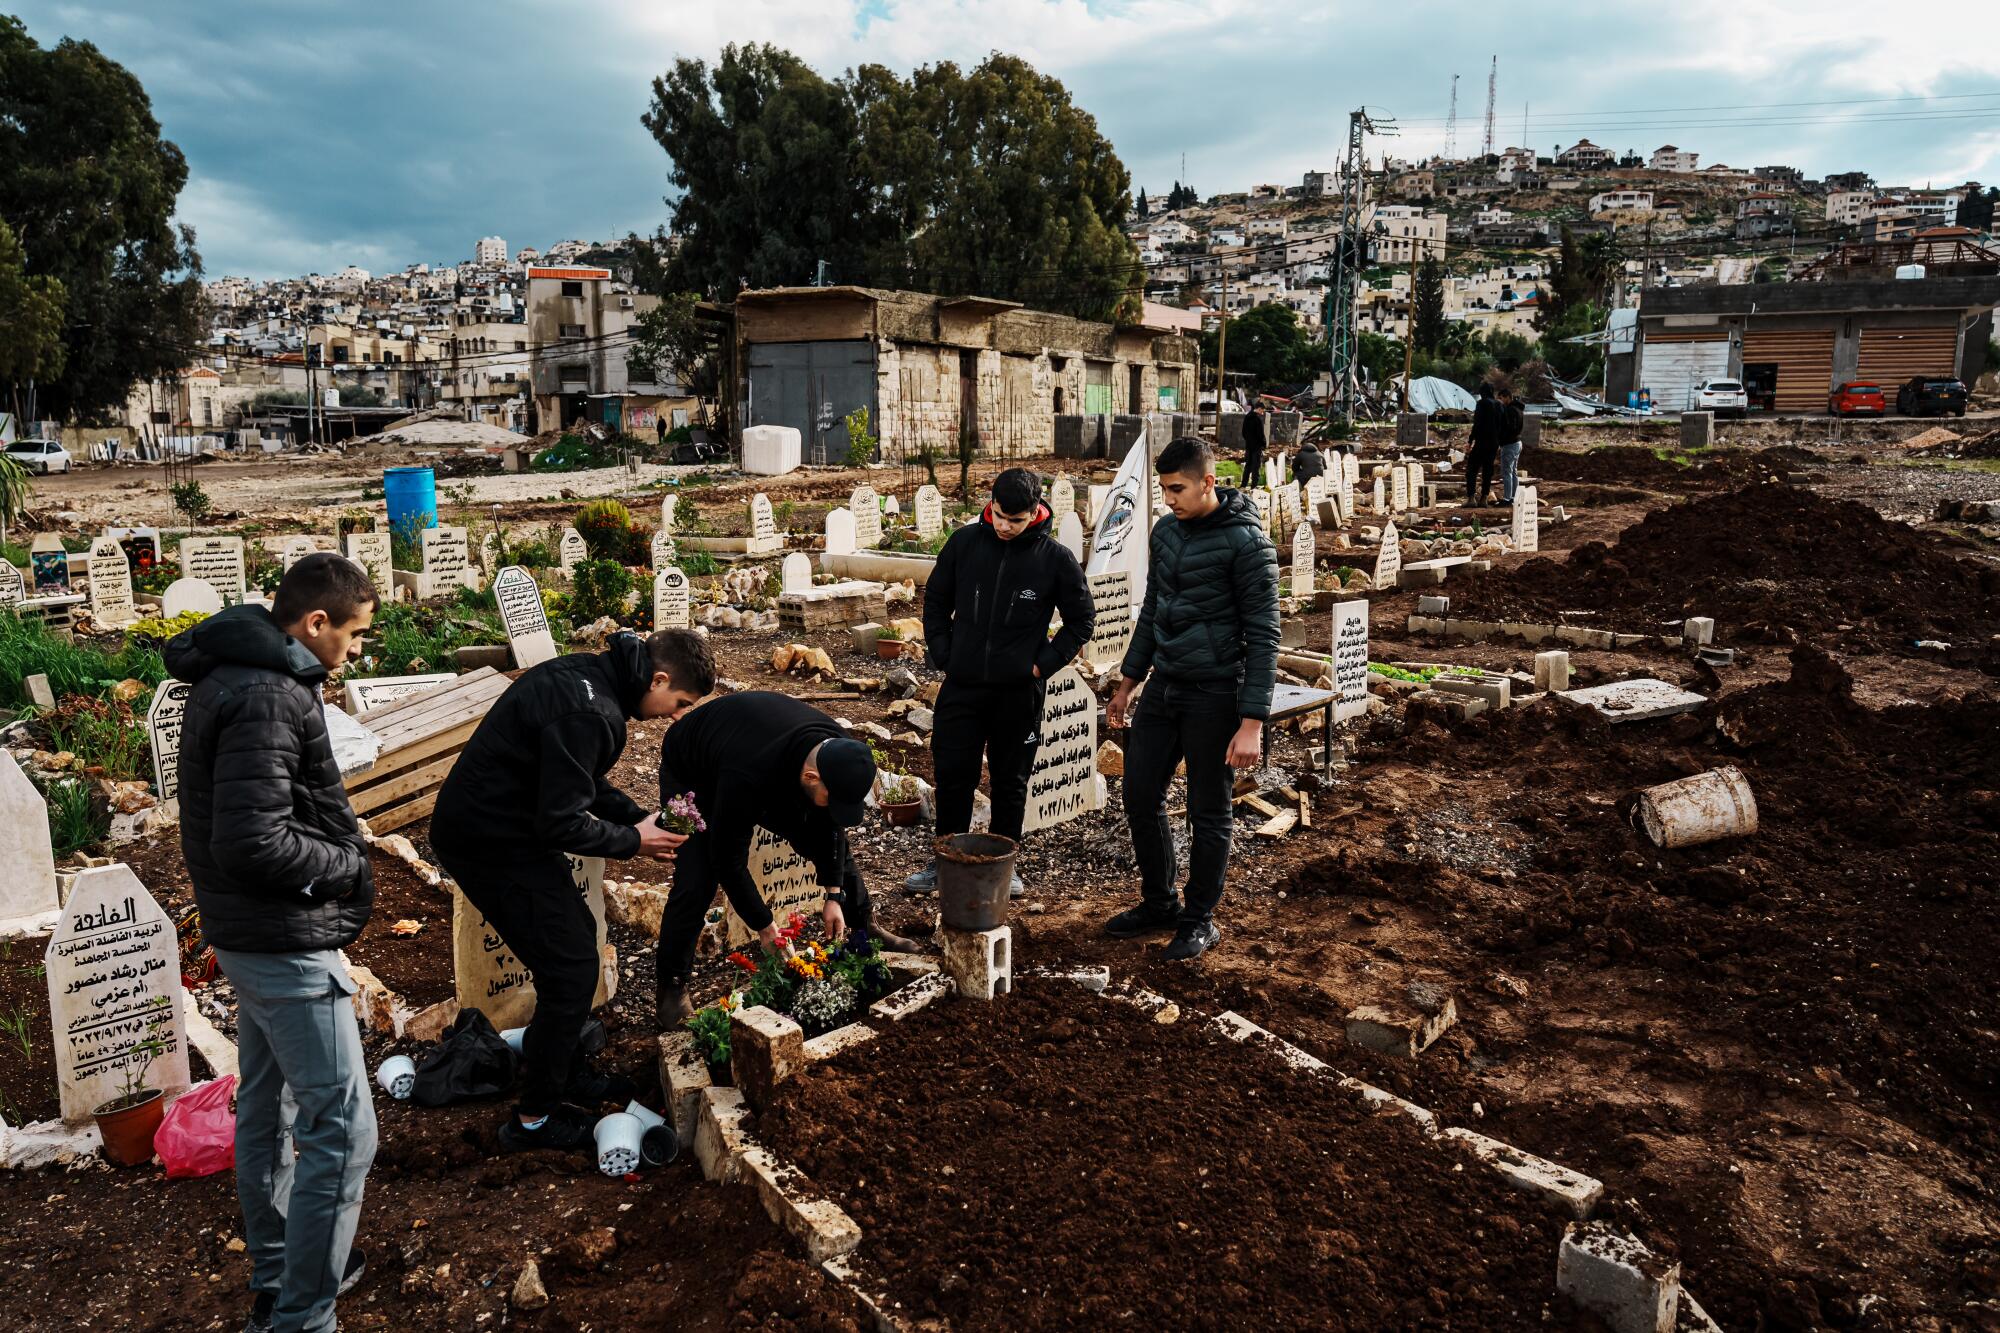 People visit and pay their respects at a grave.